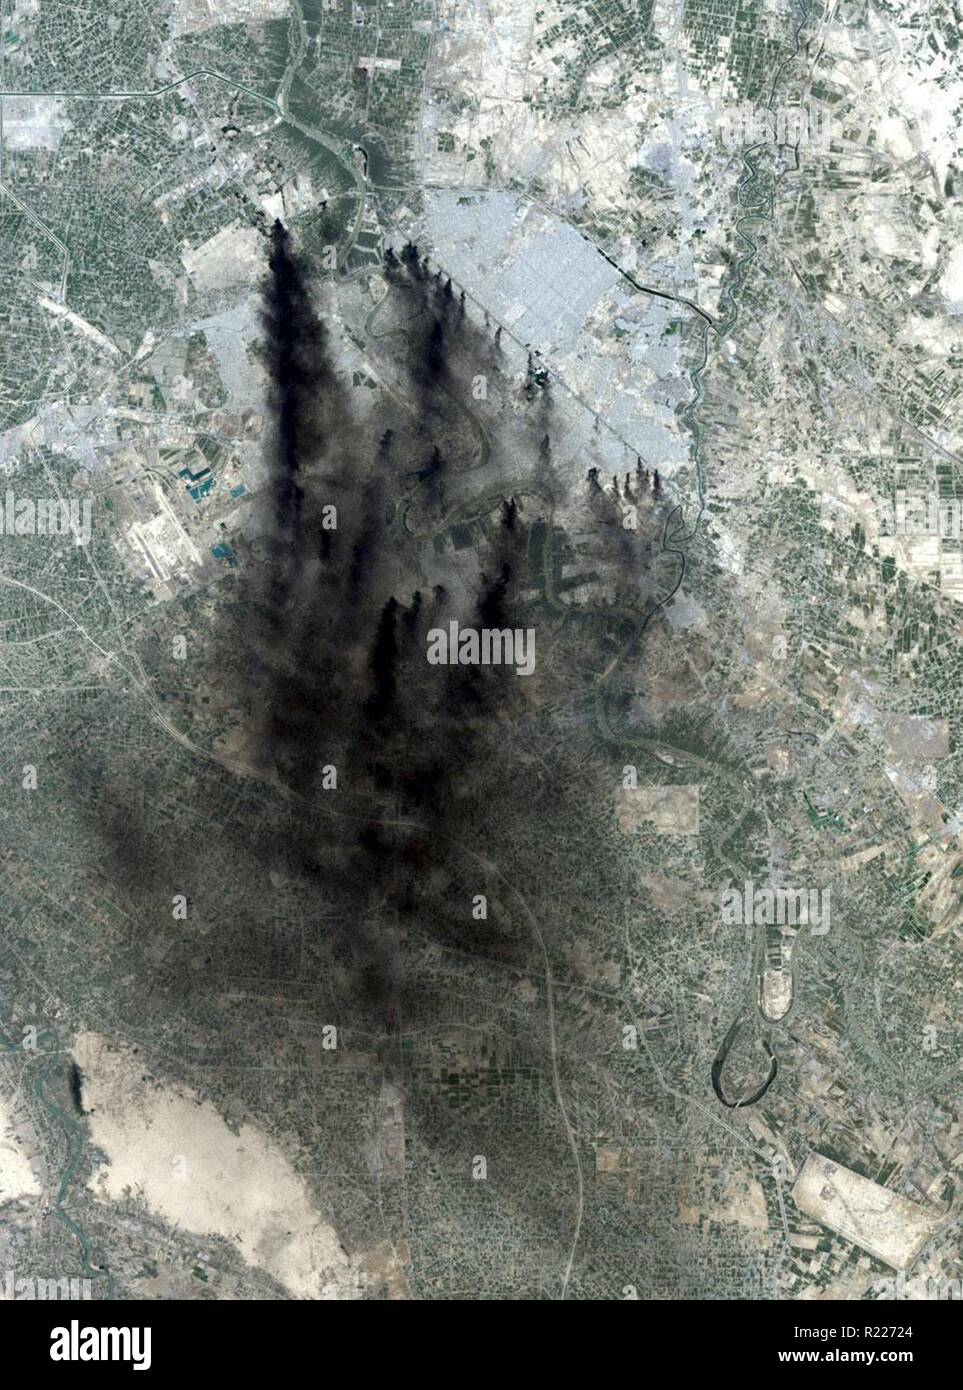 Fires from coalition bombing during the second war in Iraq provided a dramatic, smoke-filled image over Baghdad. The Tigris River snakes north to south in this image. Baghdad International Airport is west of the smoke. Stock Photo